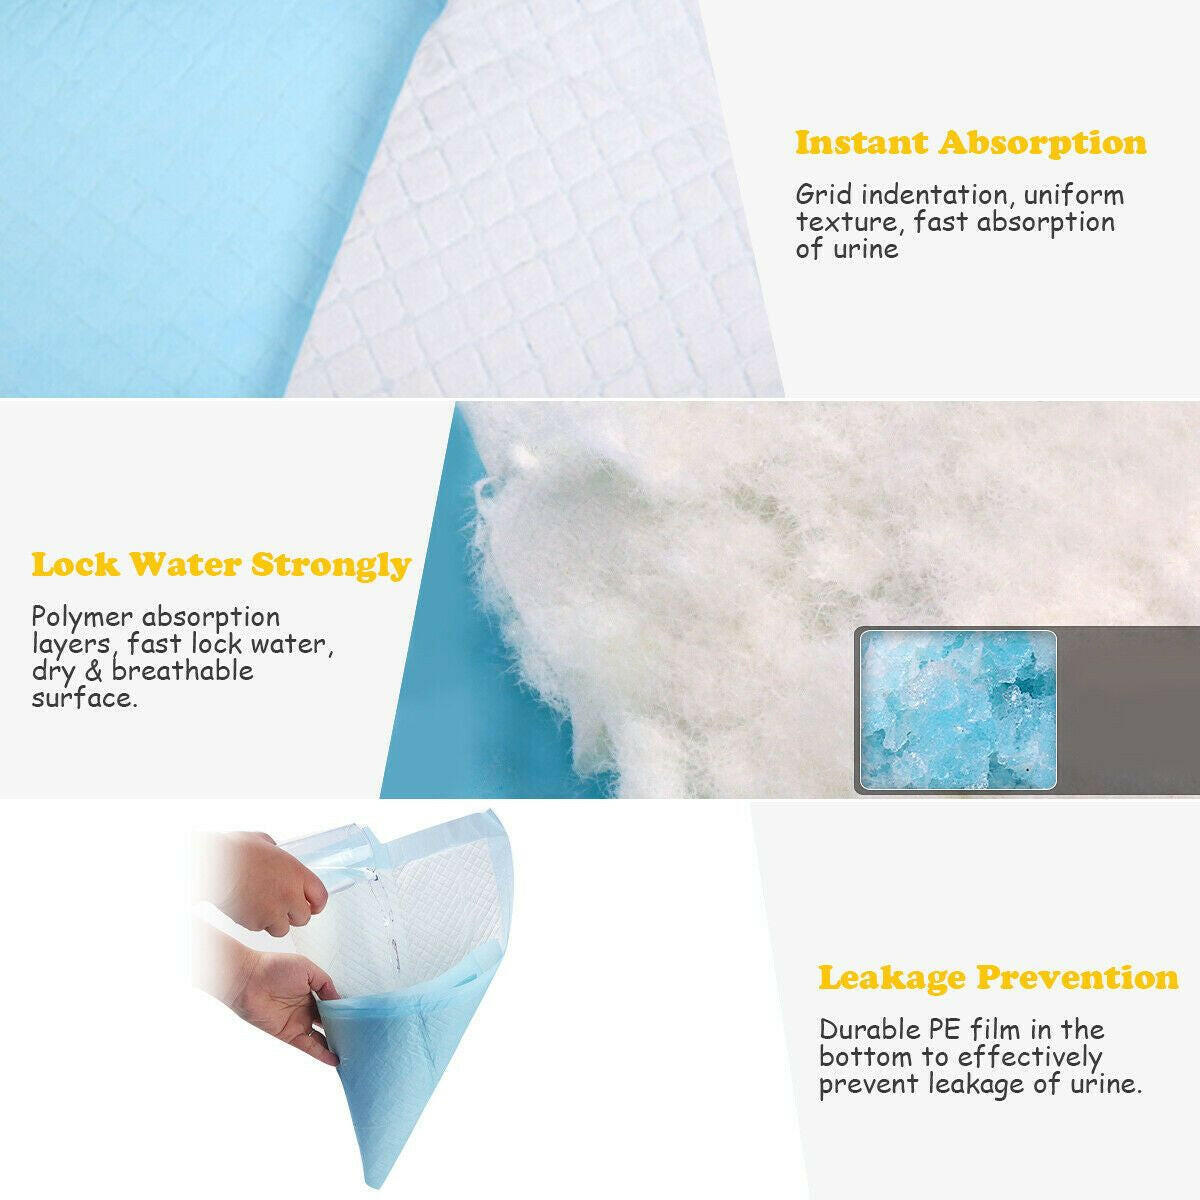 High-Quality Dog Pee Pads with 5-Layer Design in 4 Sizes for Maximum Absorbency and Ease of Use